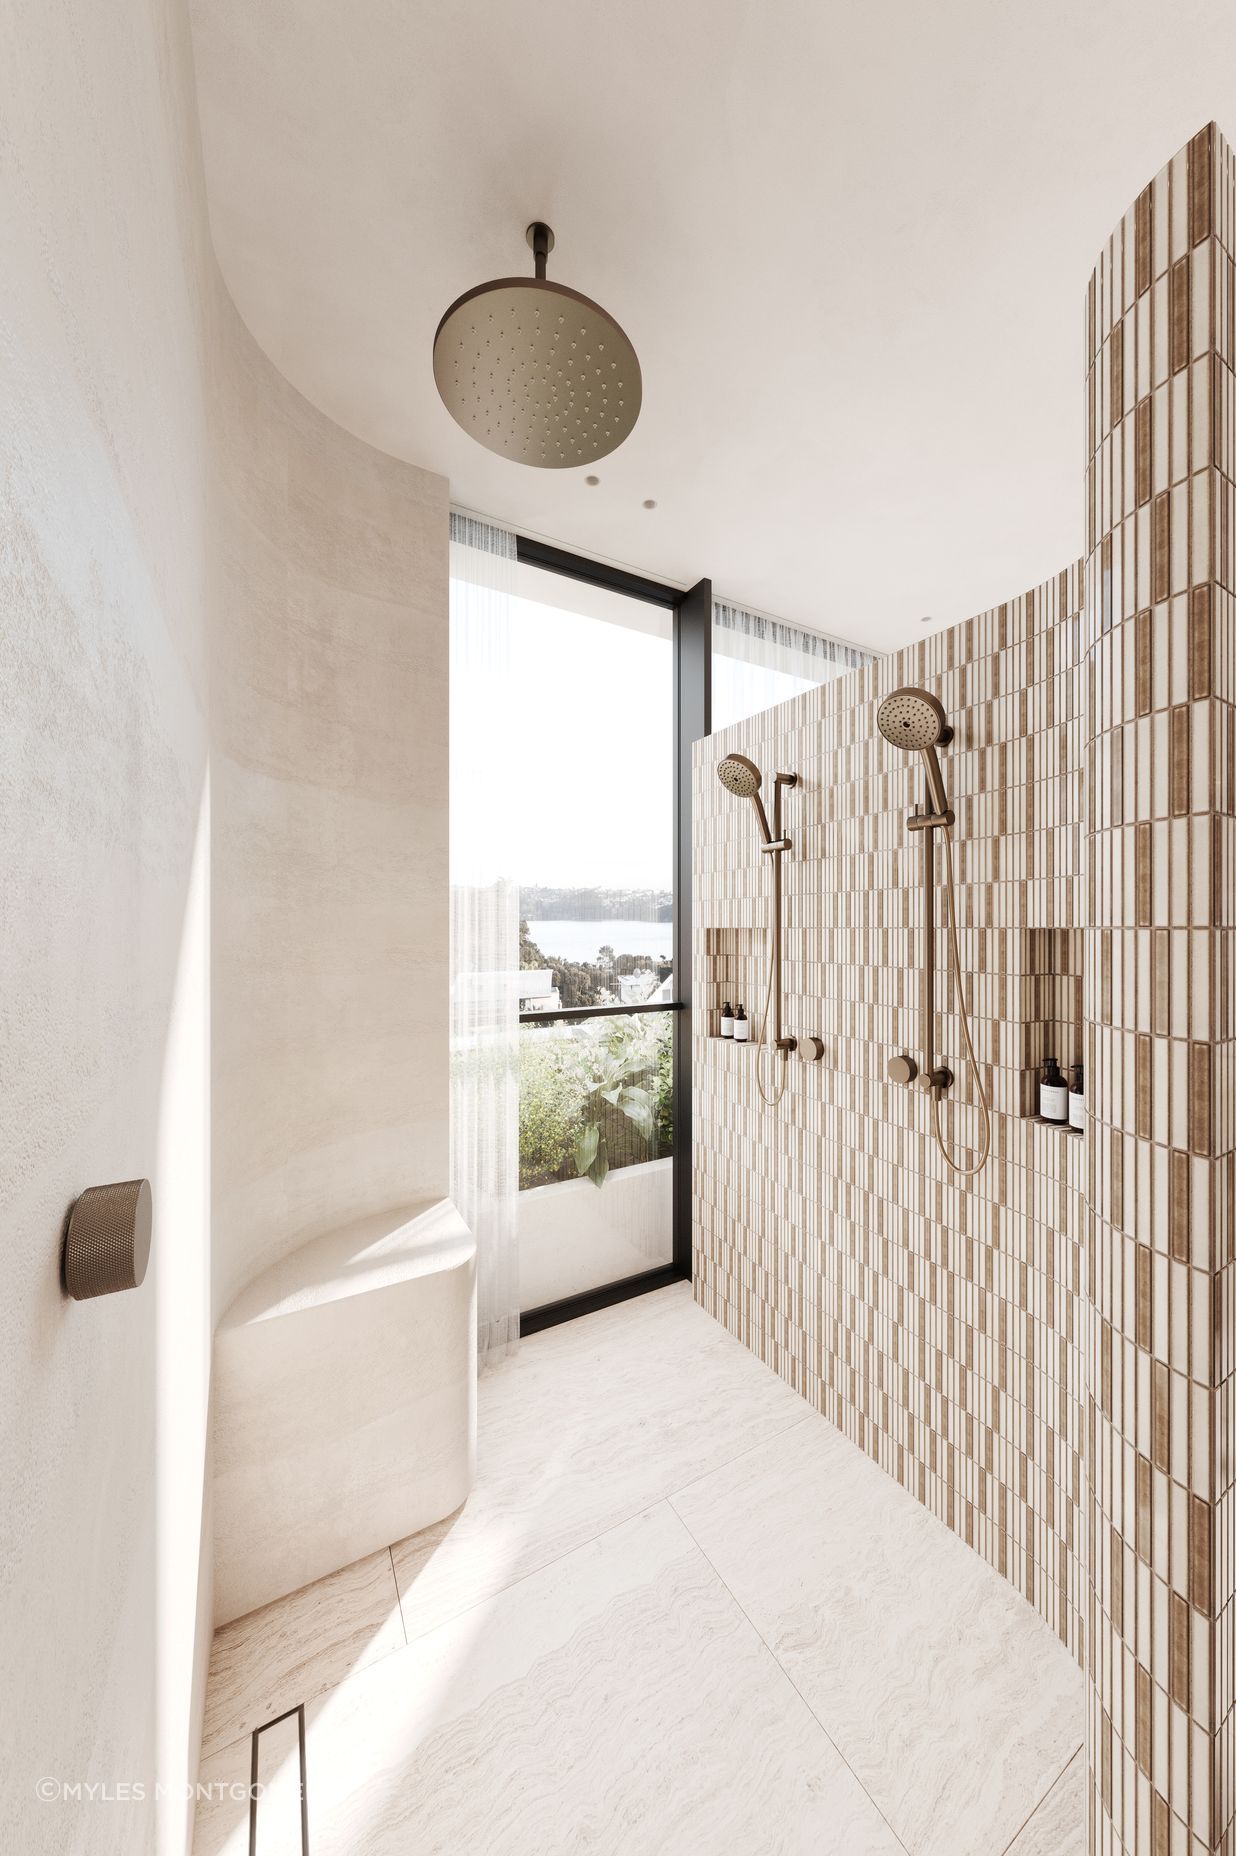 Refined double showers provide a ritualistic setting.